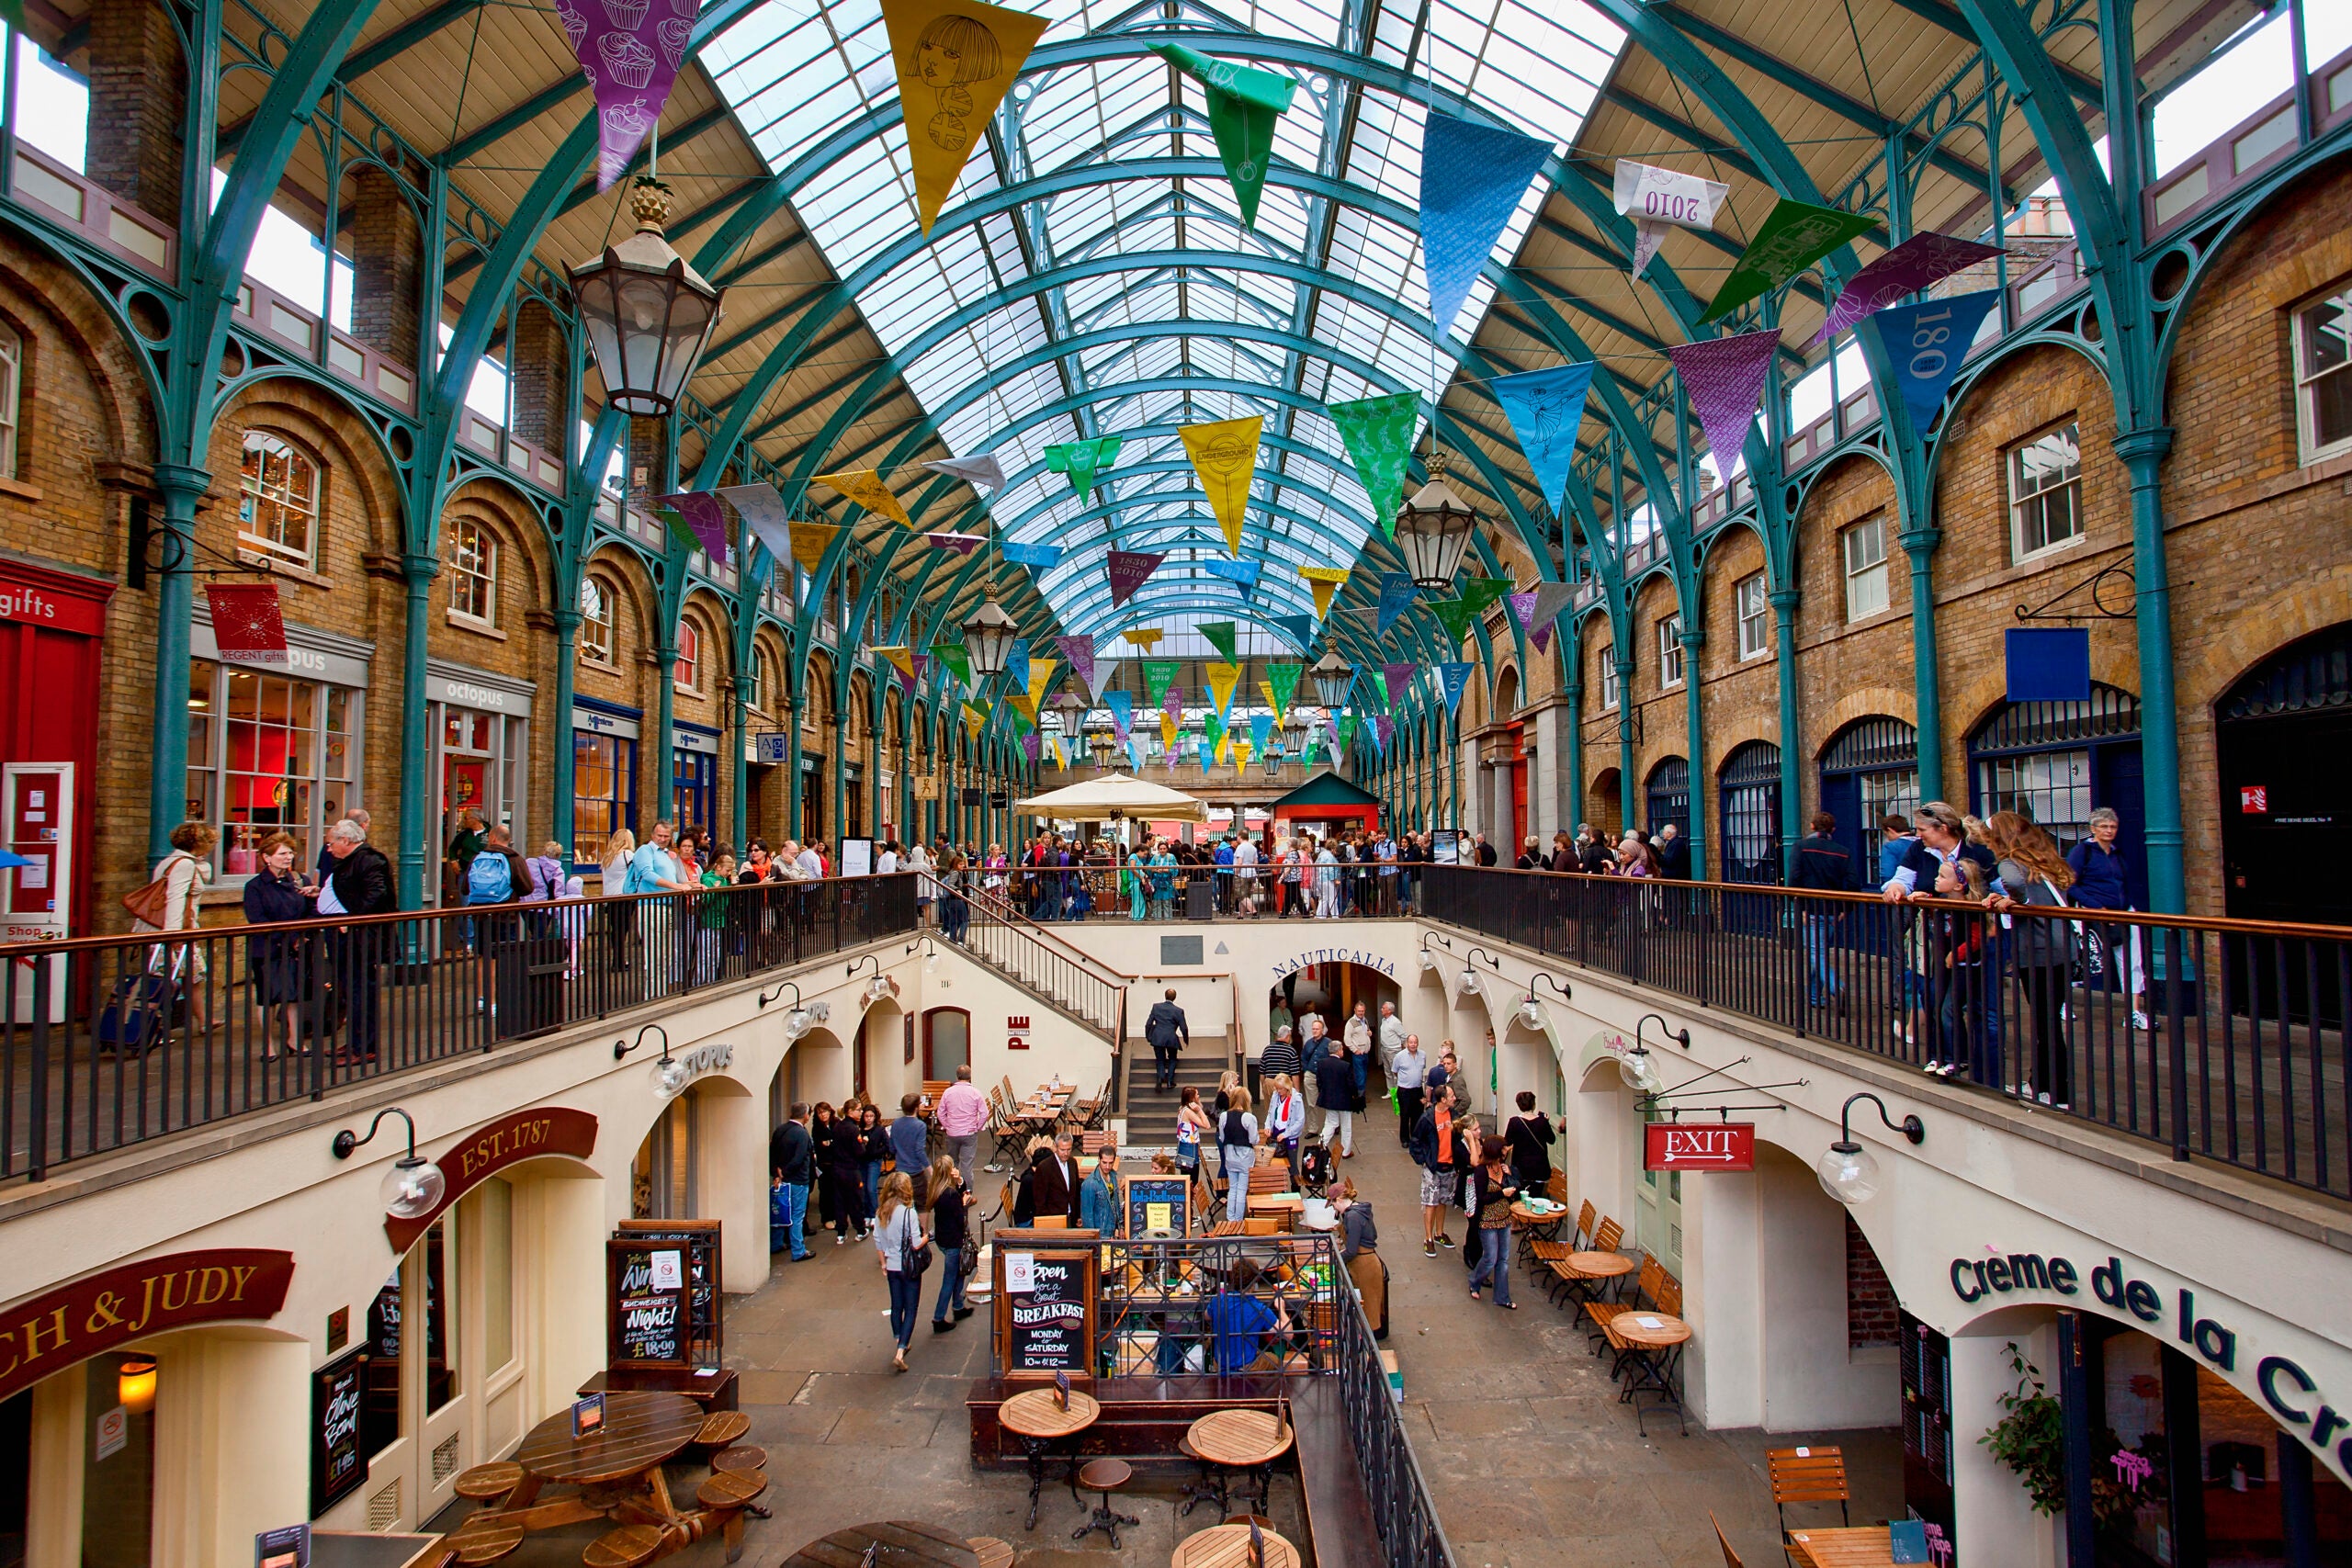 Inside the market at Covent Garden